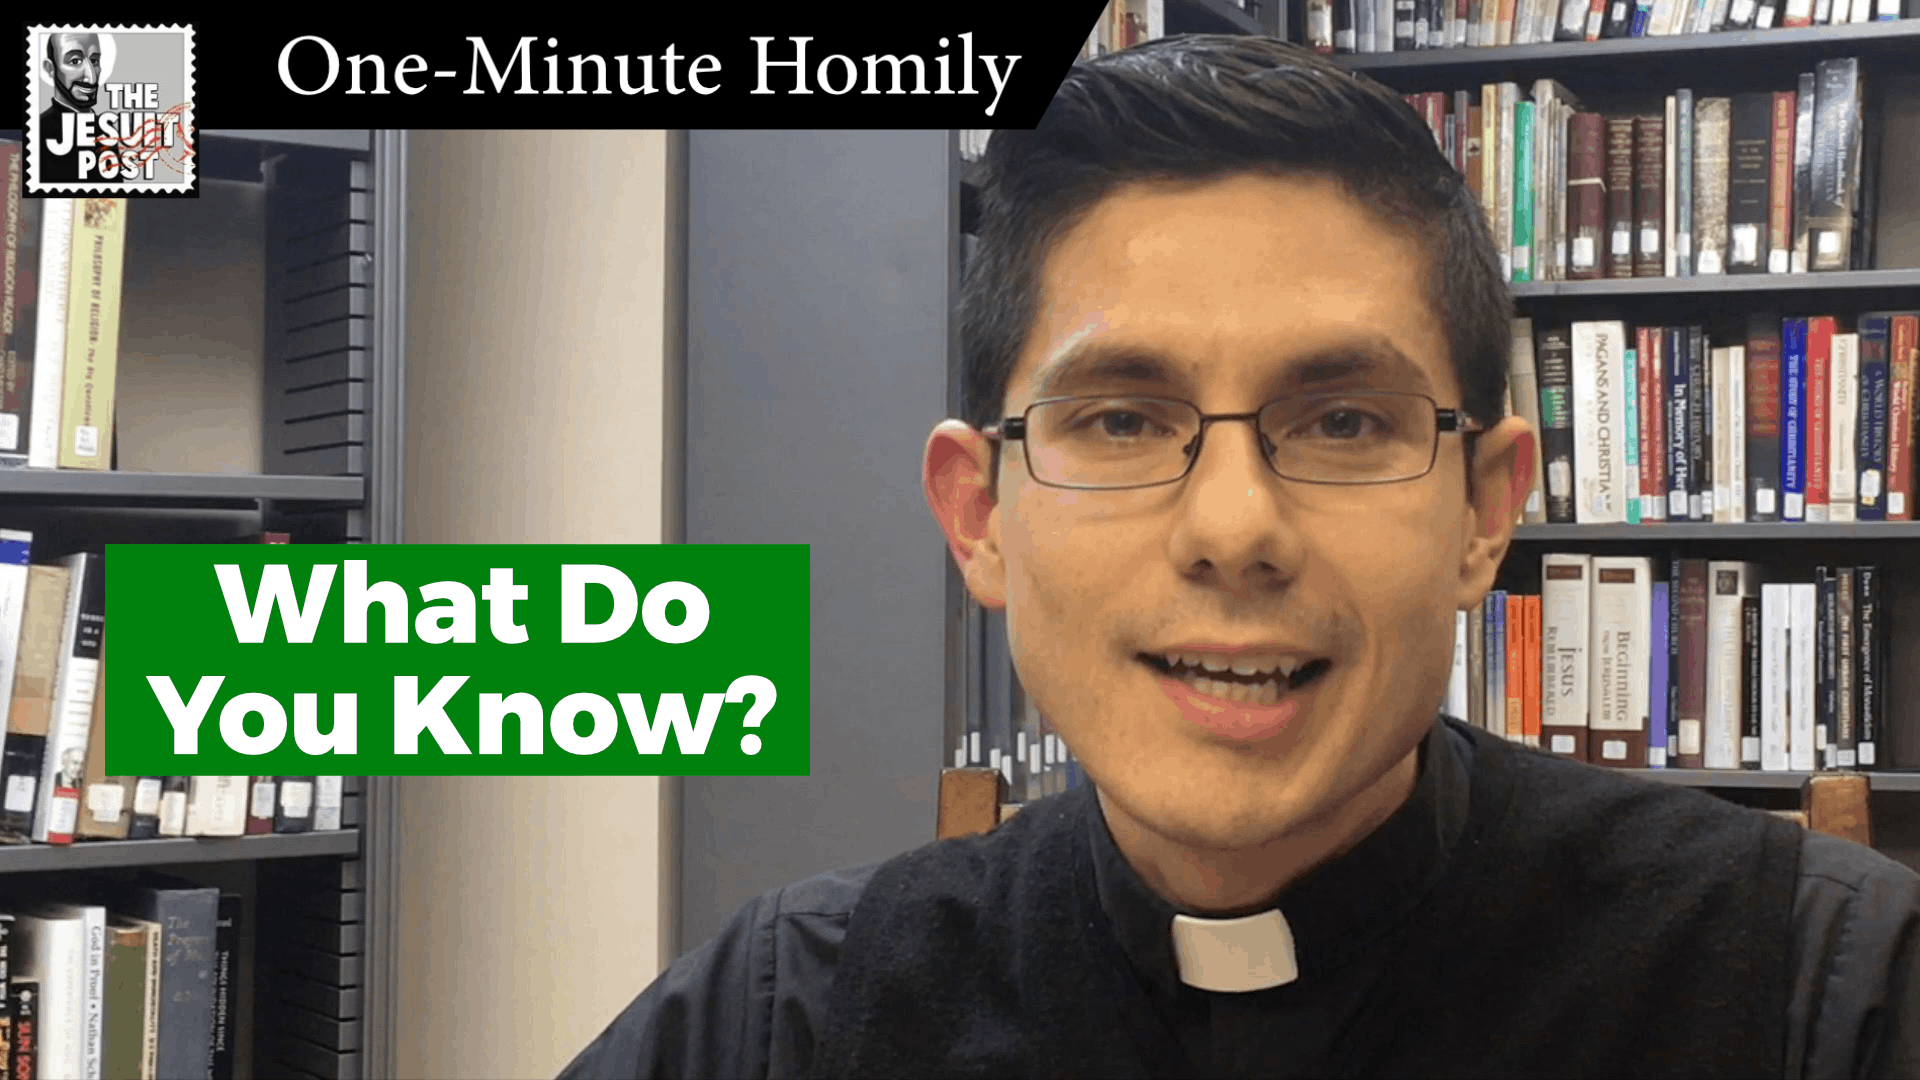 One-Minute Homily: “What do you know?”